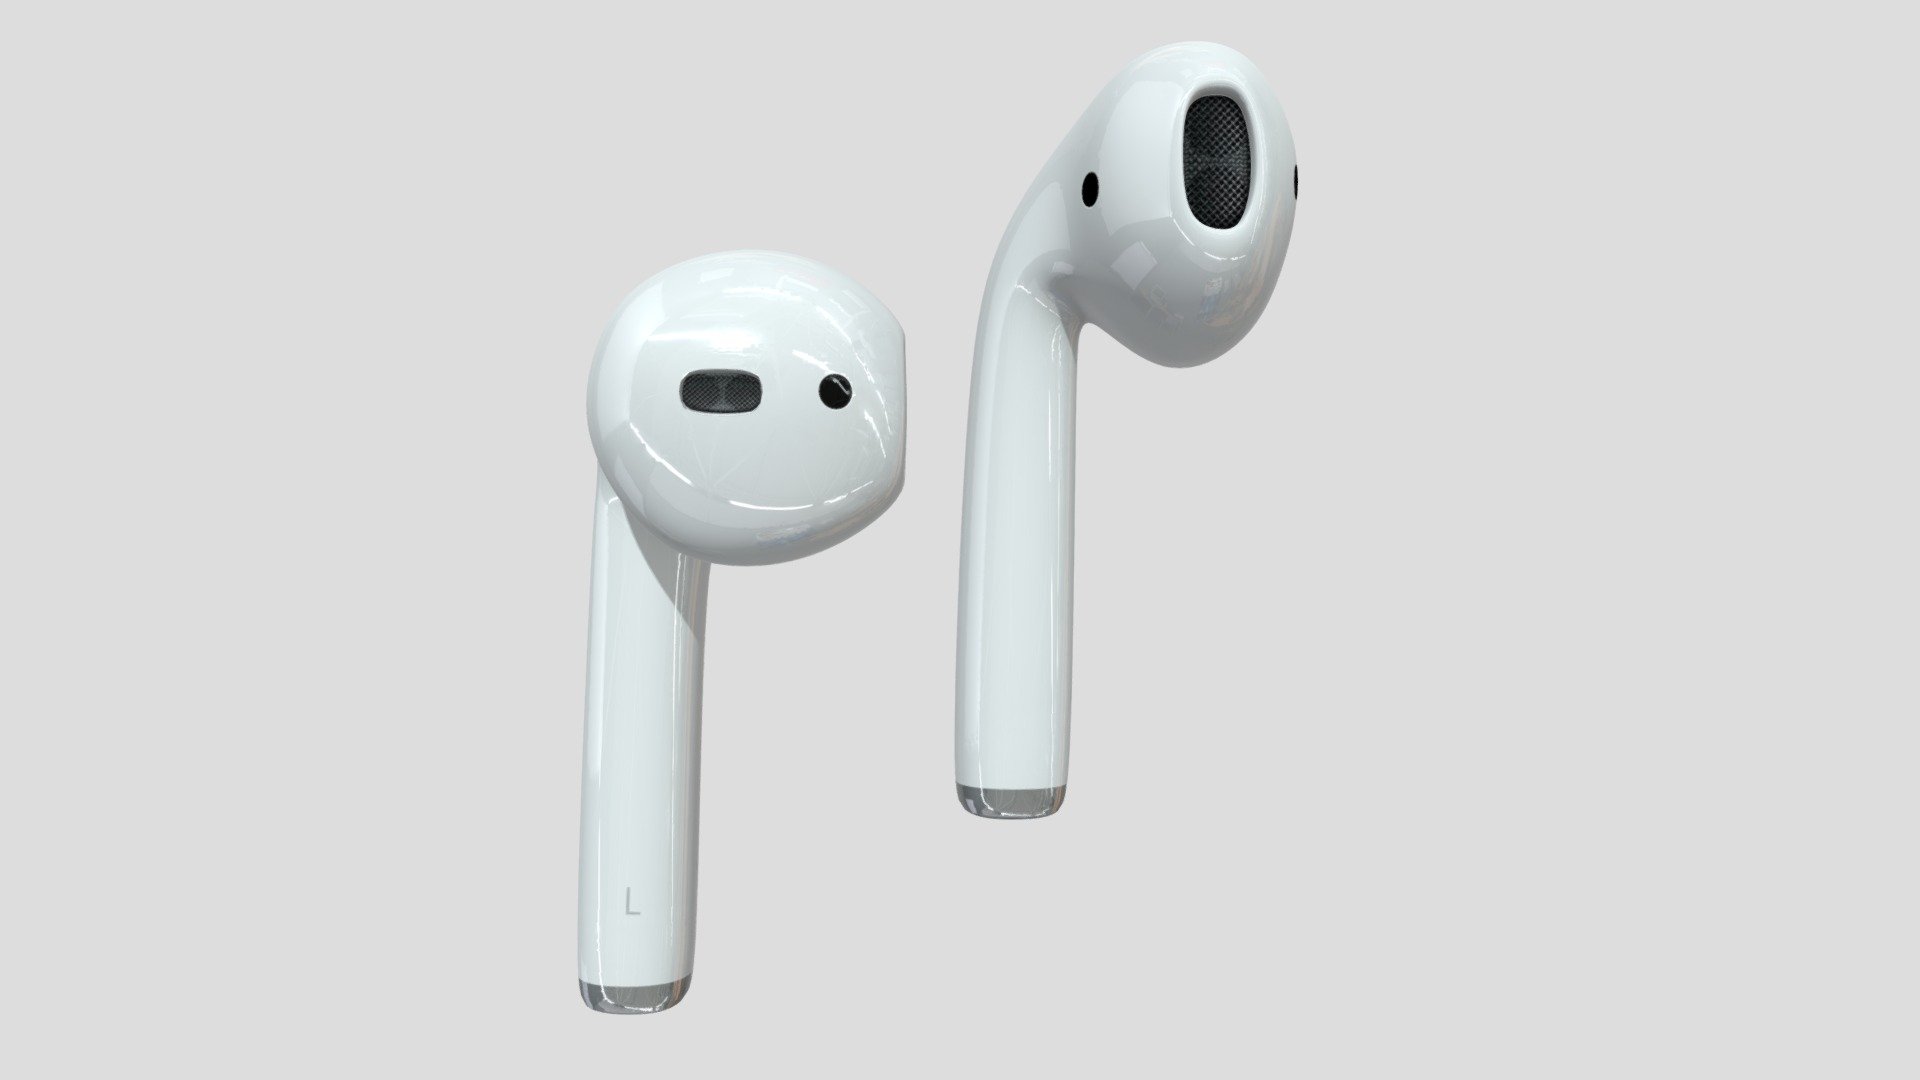 A lowpoly Apple Airpods with PBR textures made in substance painter. Ready to use in AR/VR games or apps 3d model